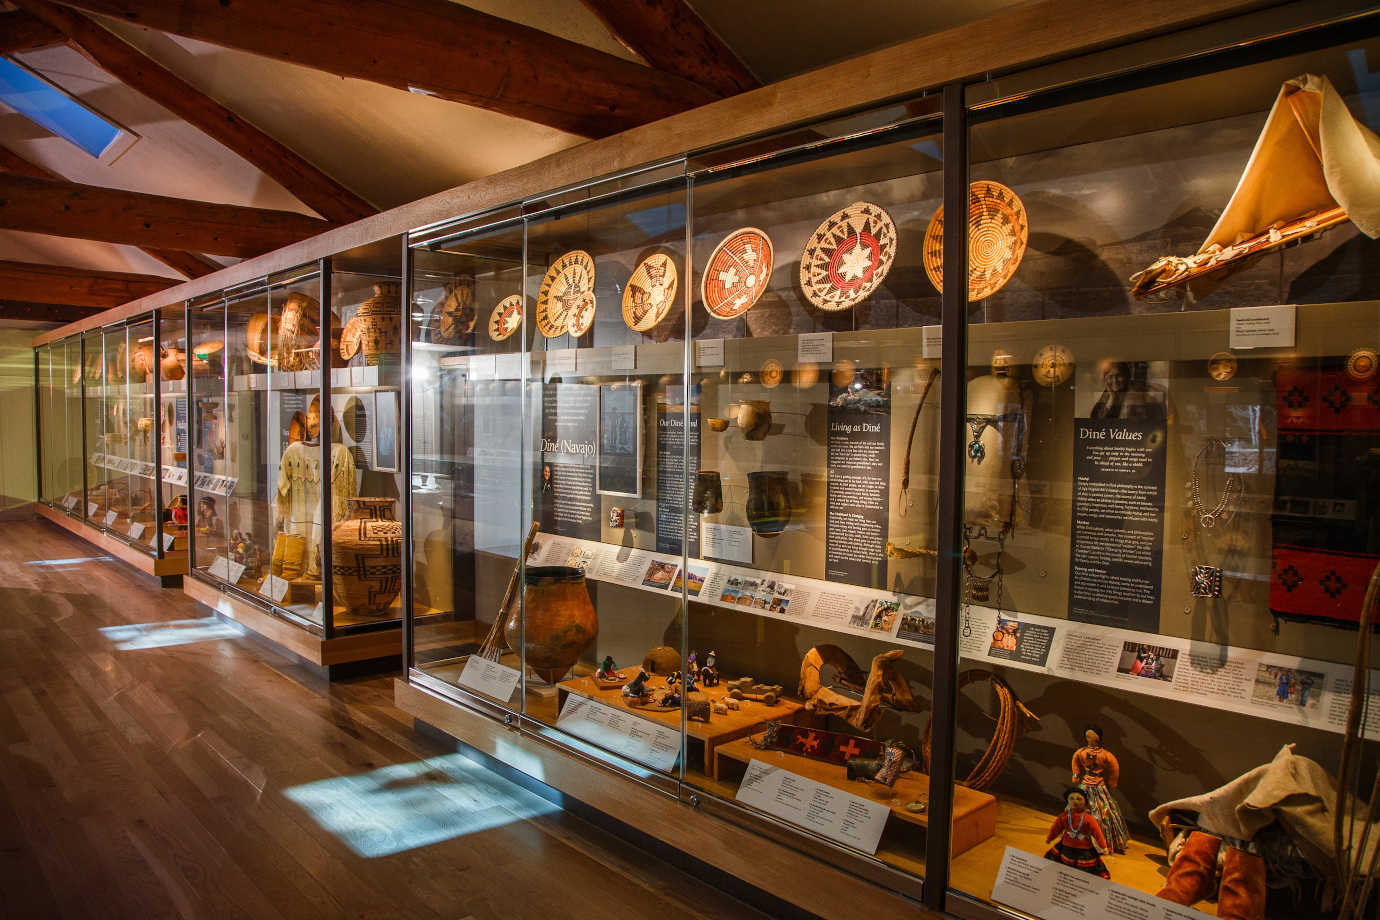 The museum plays an important role in keeping local collections local, as it holds many items unearthed in the state. Image courtesy of the Museum of Northern Arizona.